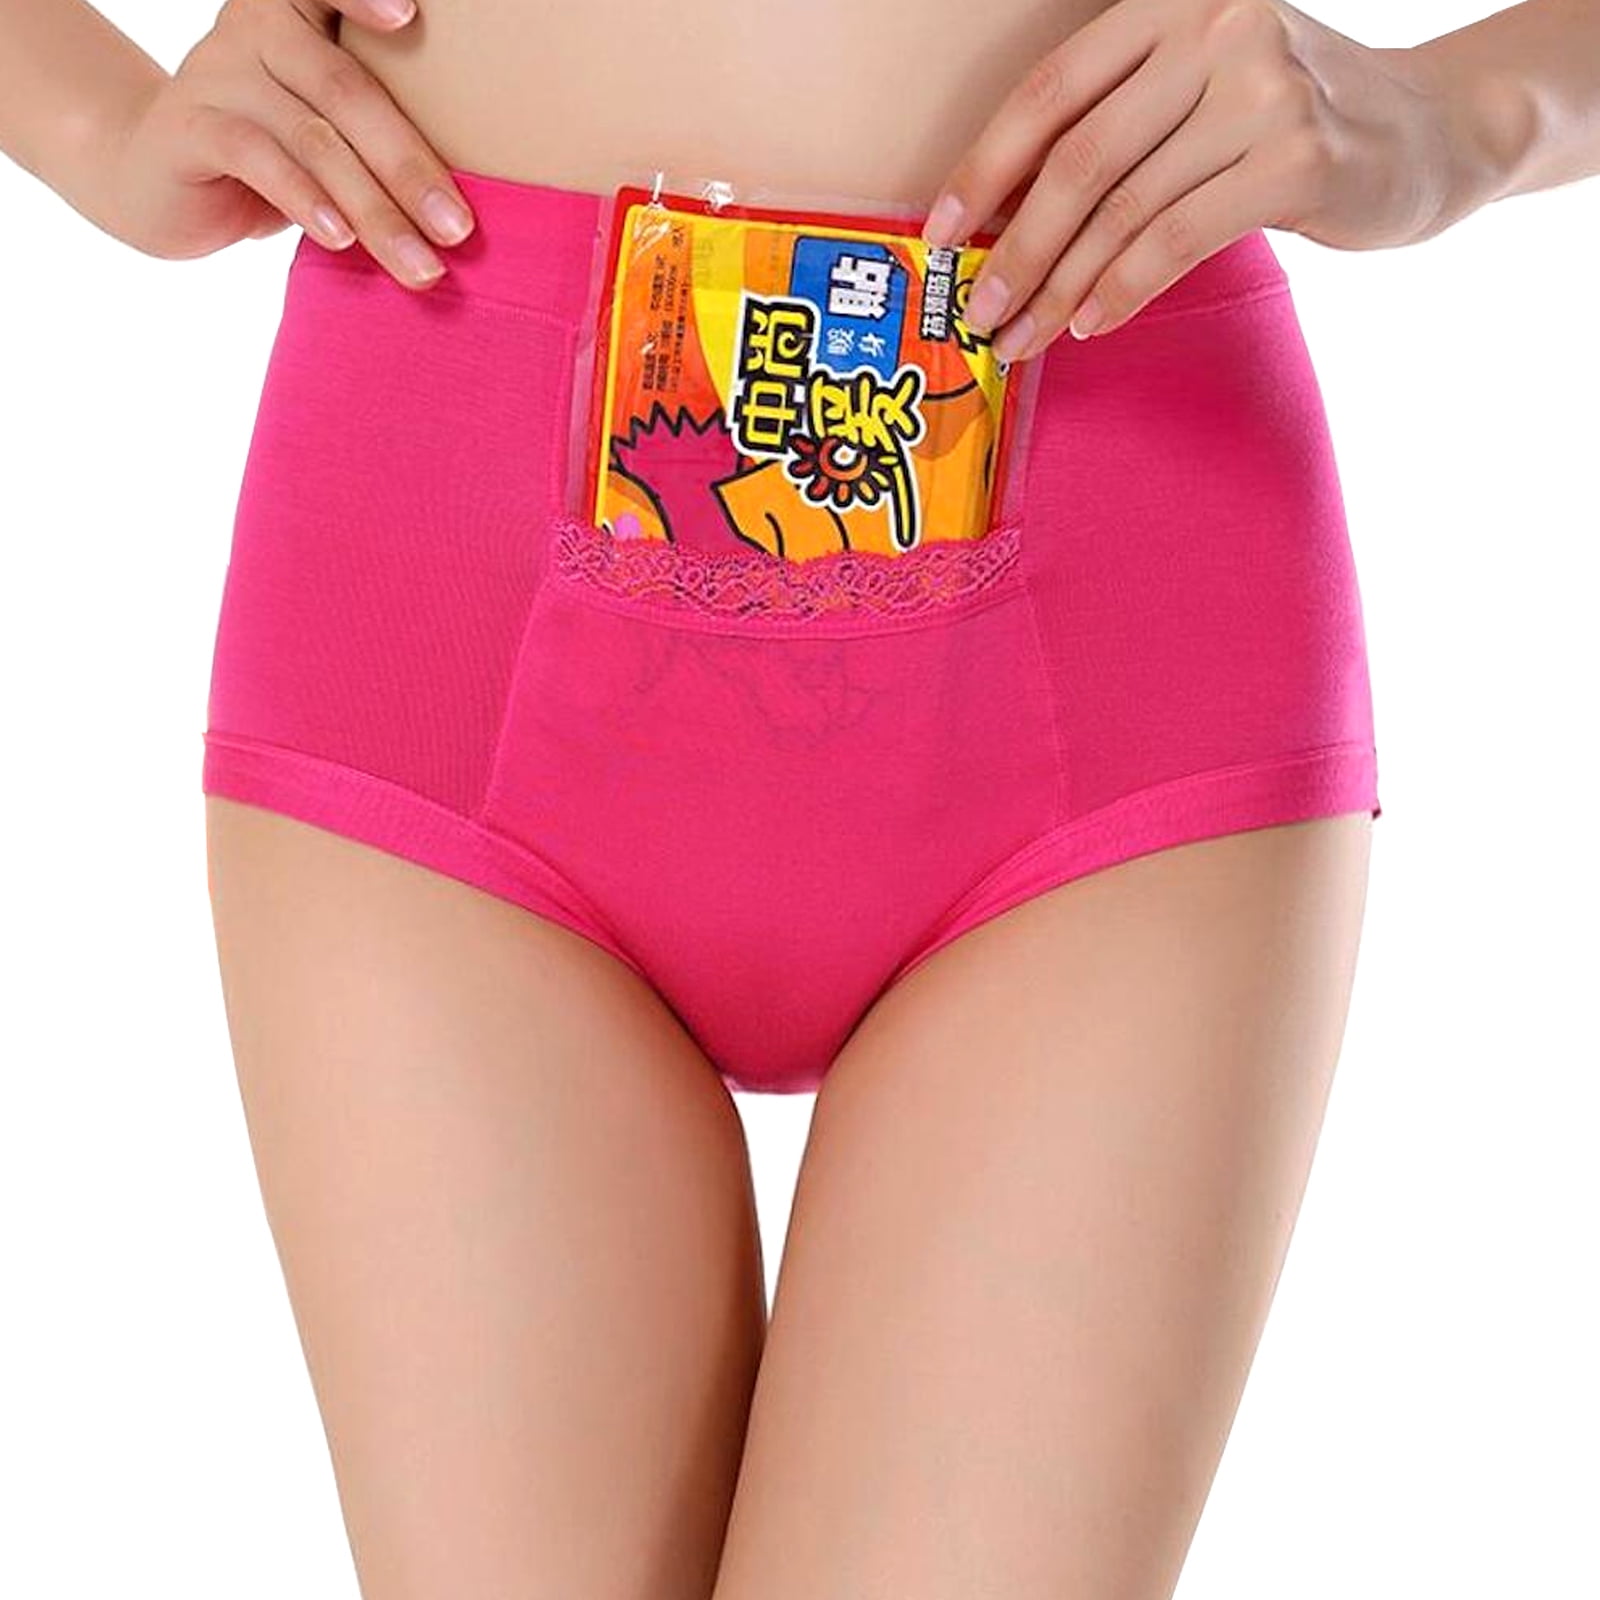 Code Red CODE RED Period Panties with Pocket- Hot Pink- L Pink Large 